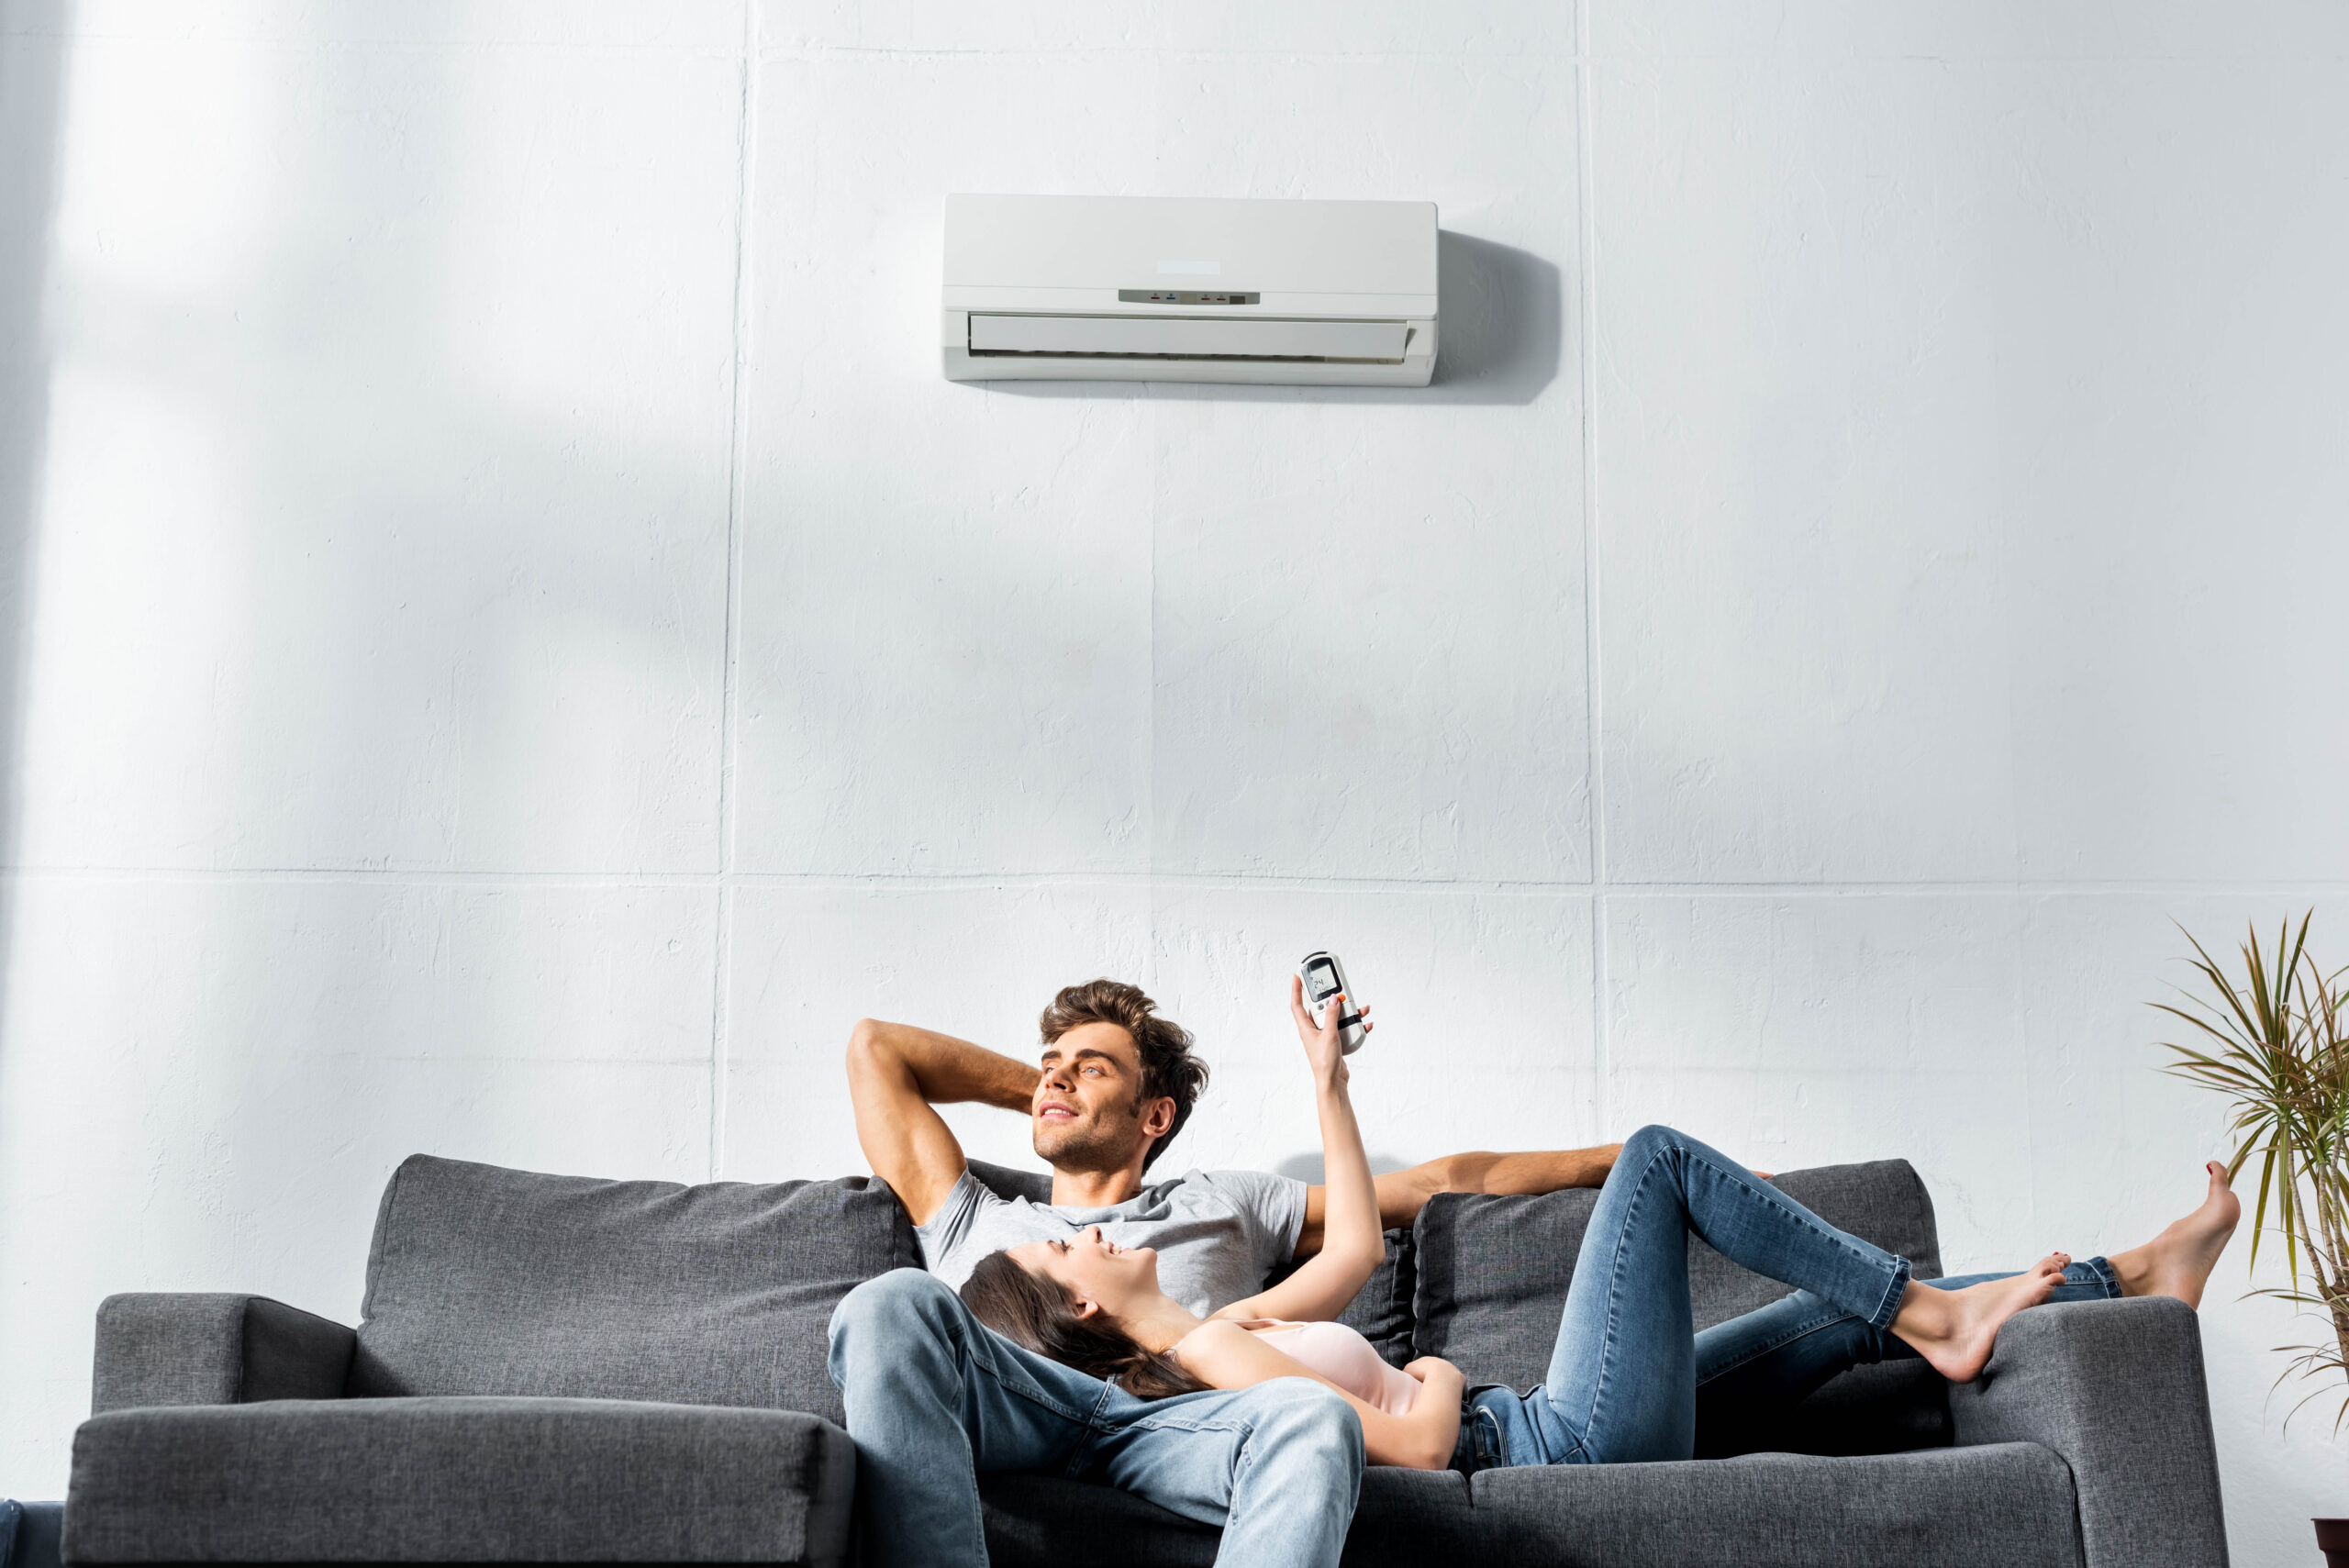 inverter air conditioning units